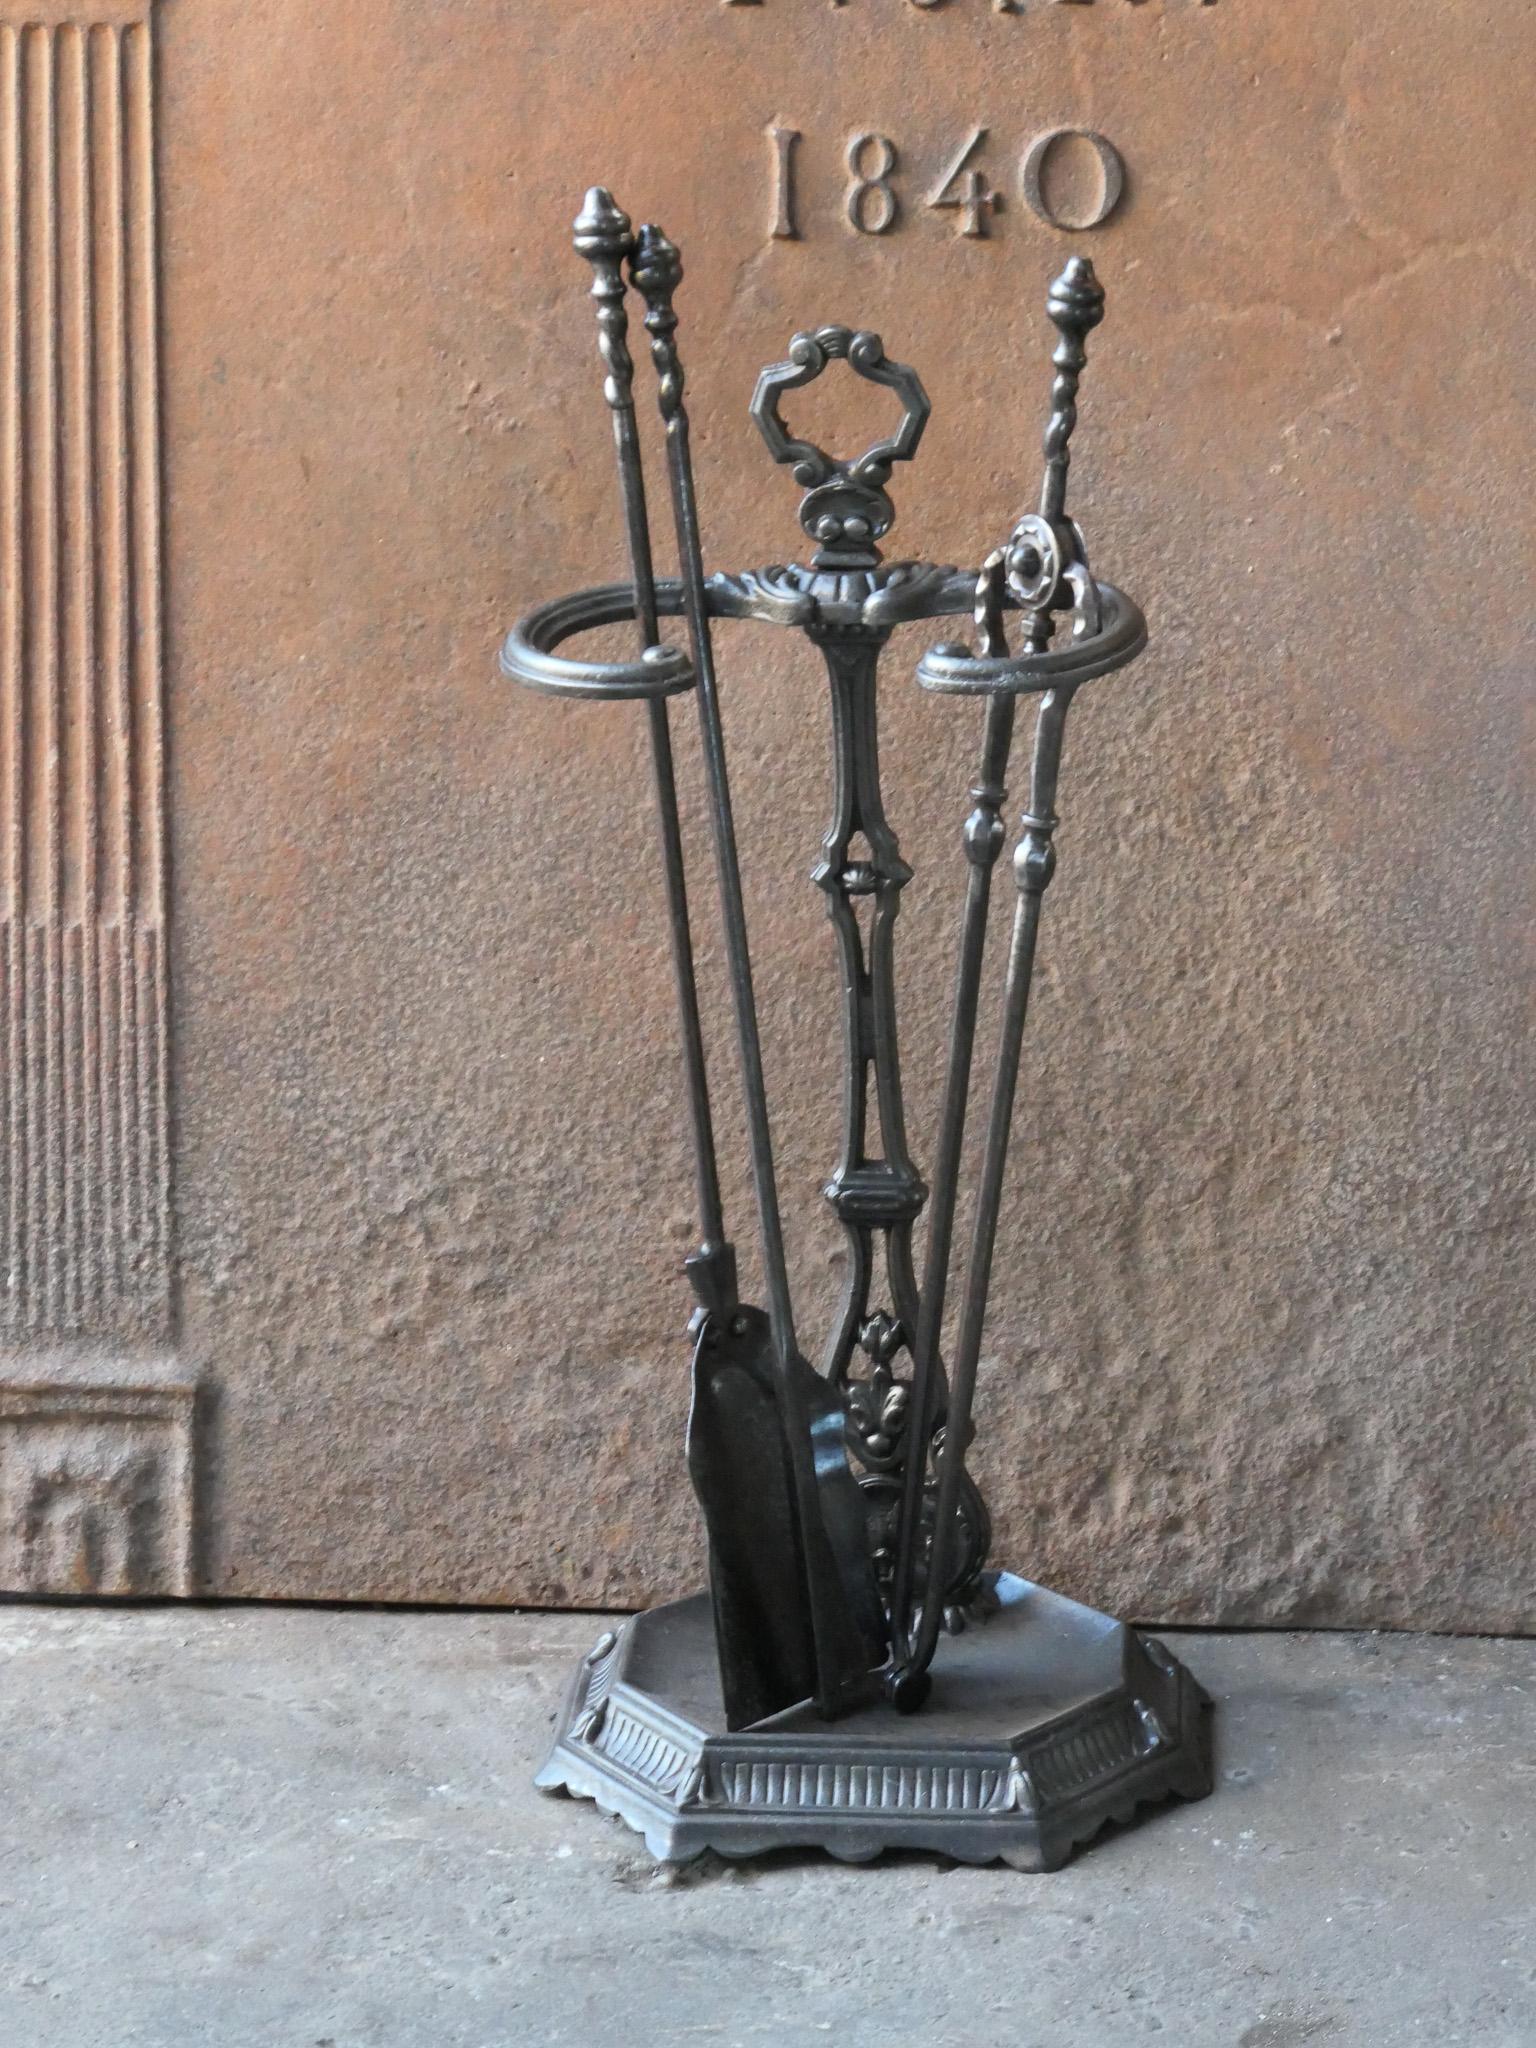 19th century English Victorian period fireplace toolset. The tools are made of wrought iron and the stand of cast iron. The toolset consists of tongs, shovel, poker and stand. The condition is good.








.